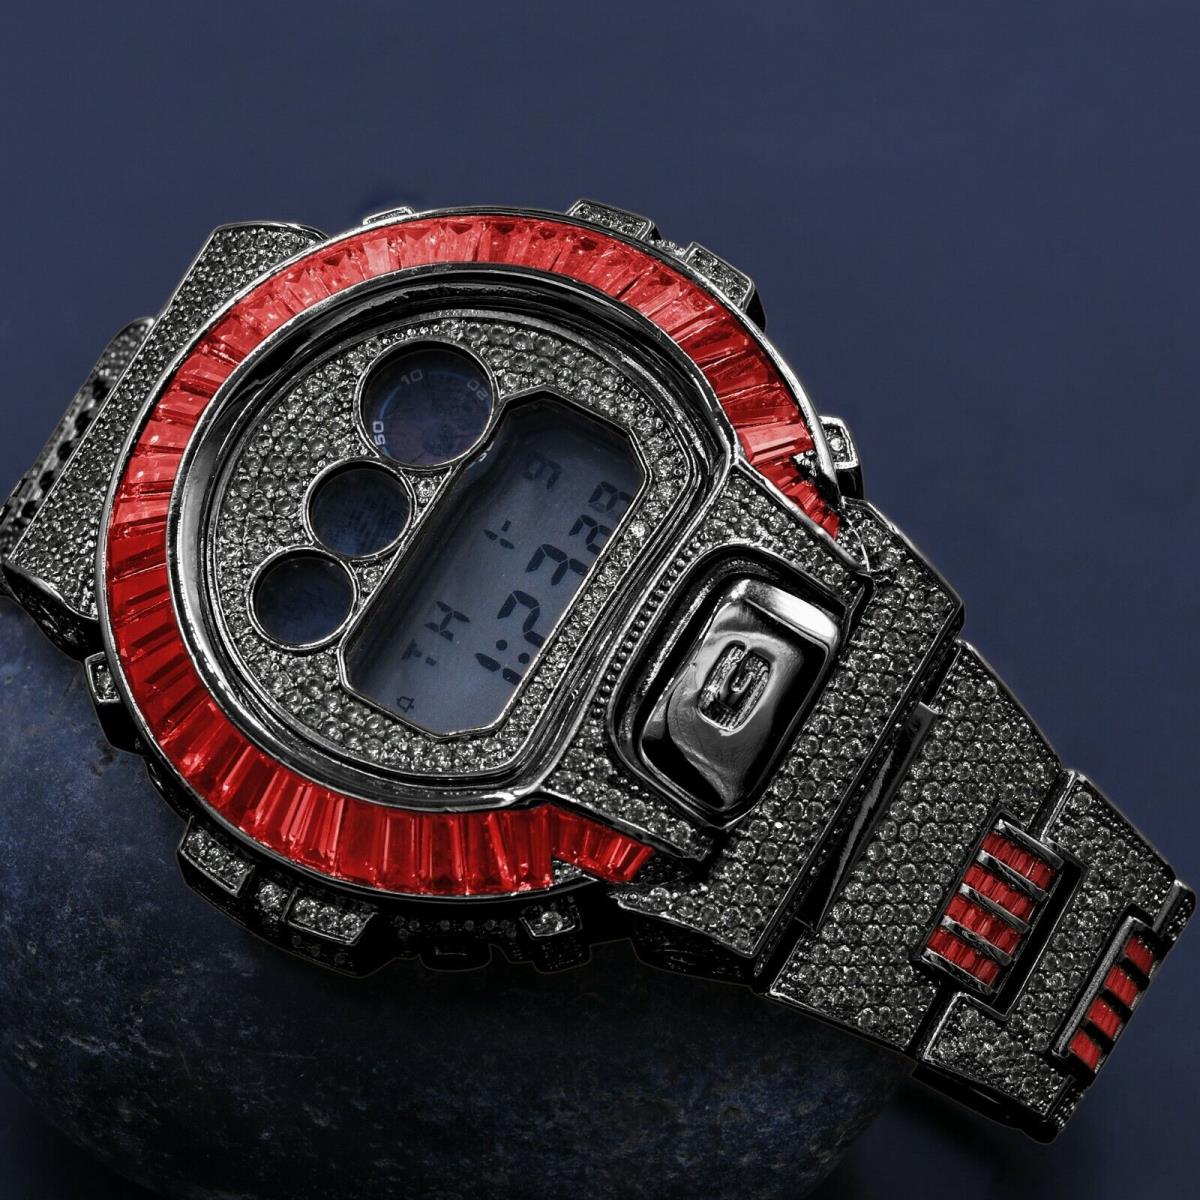 Icy Baguette Red Ruby Black Gold Casio G-shock DW-6900 Watch